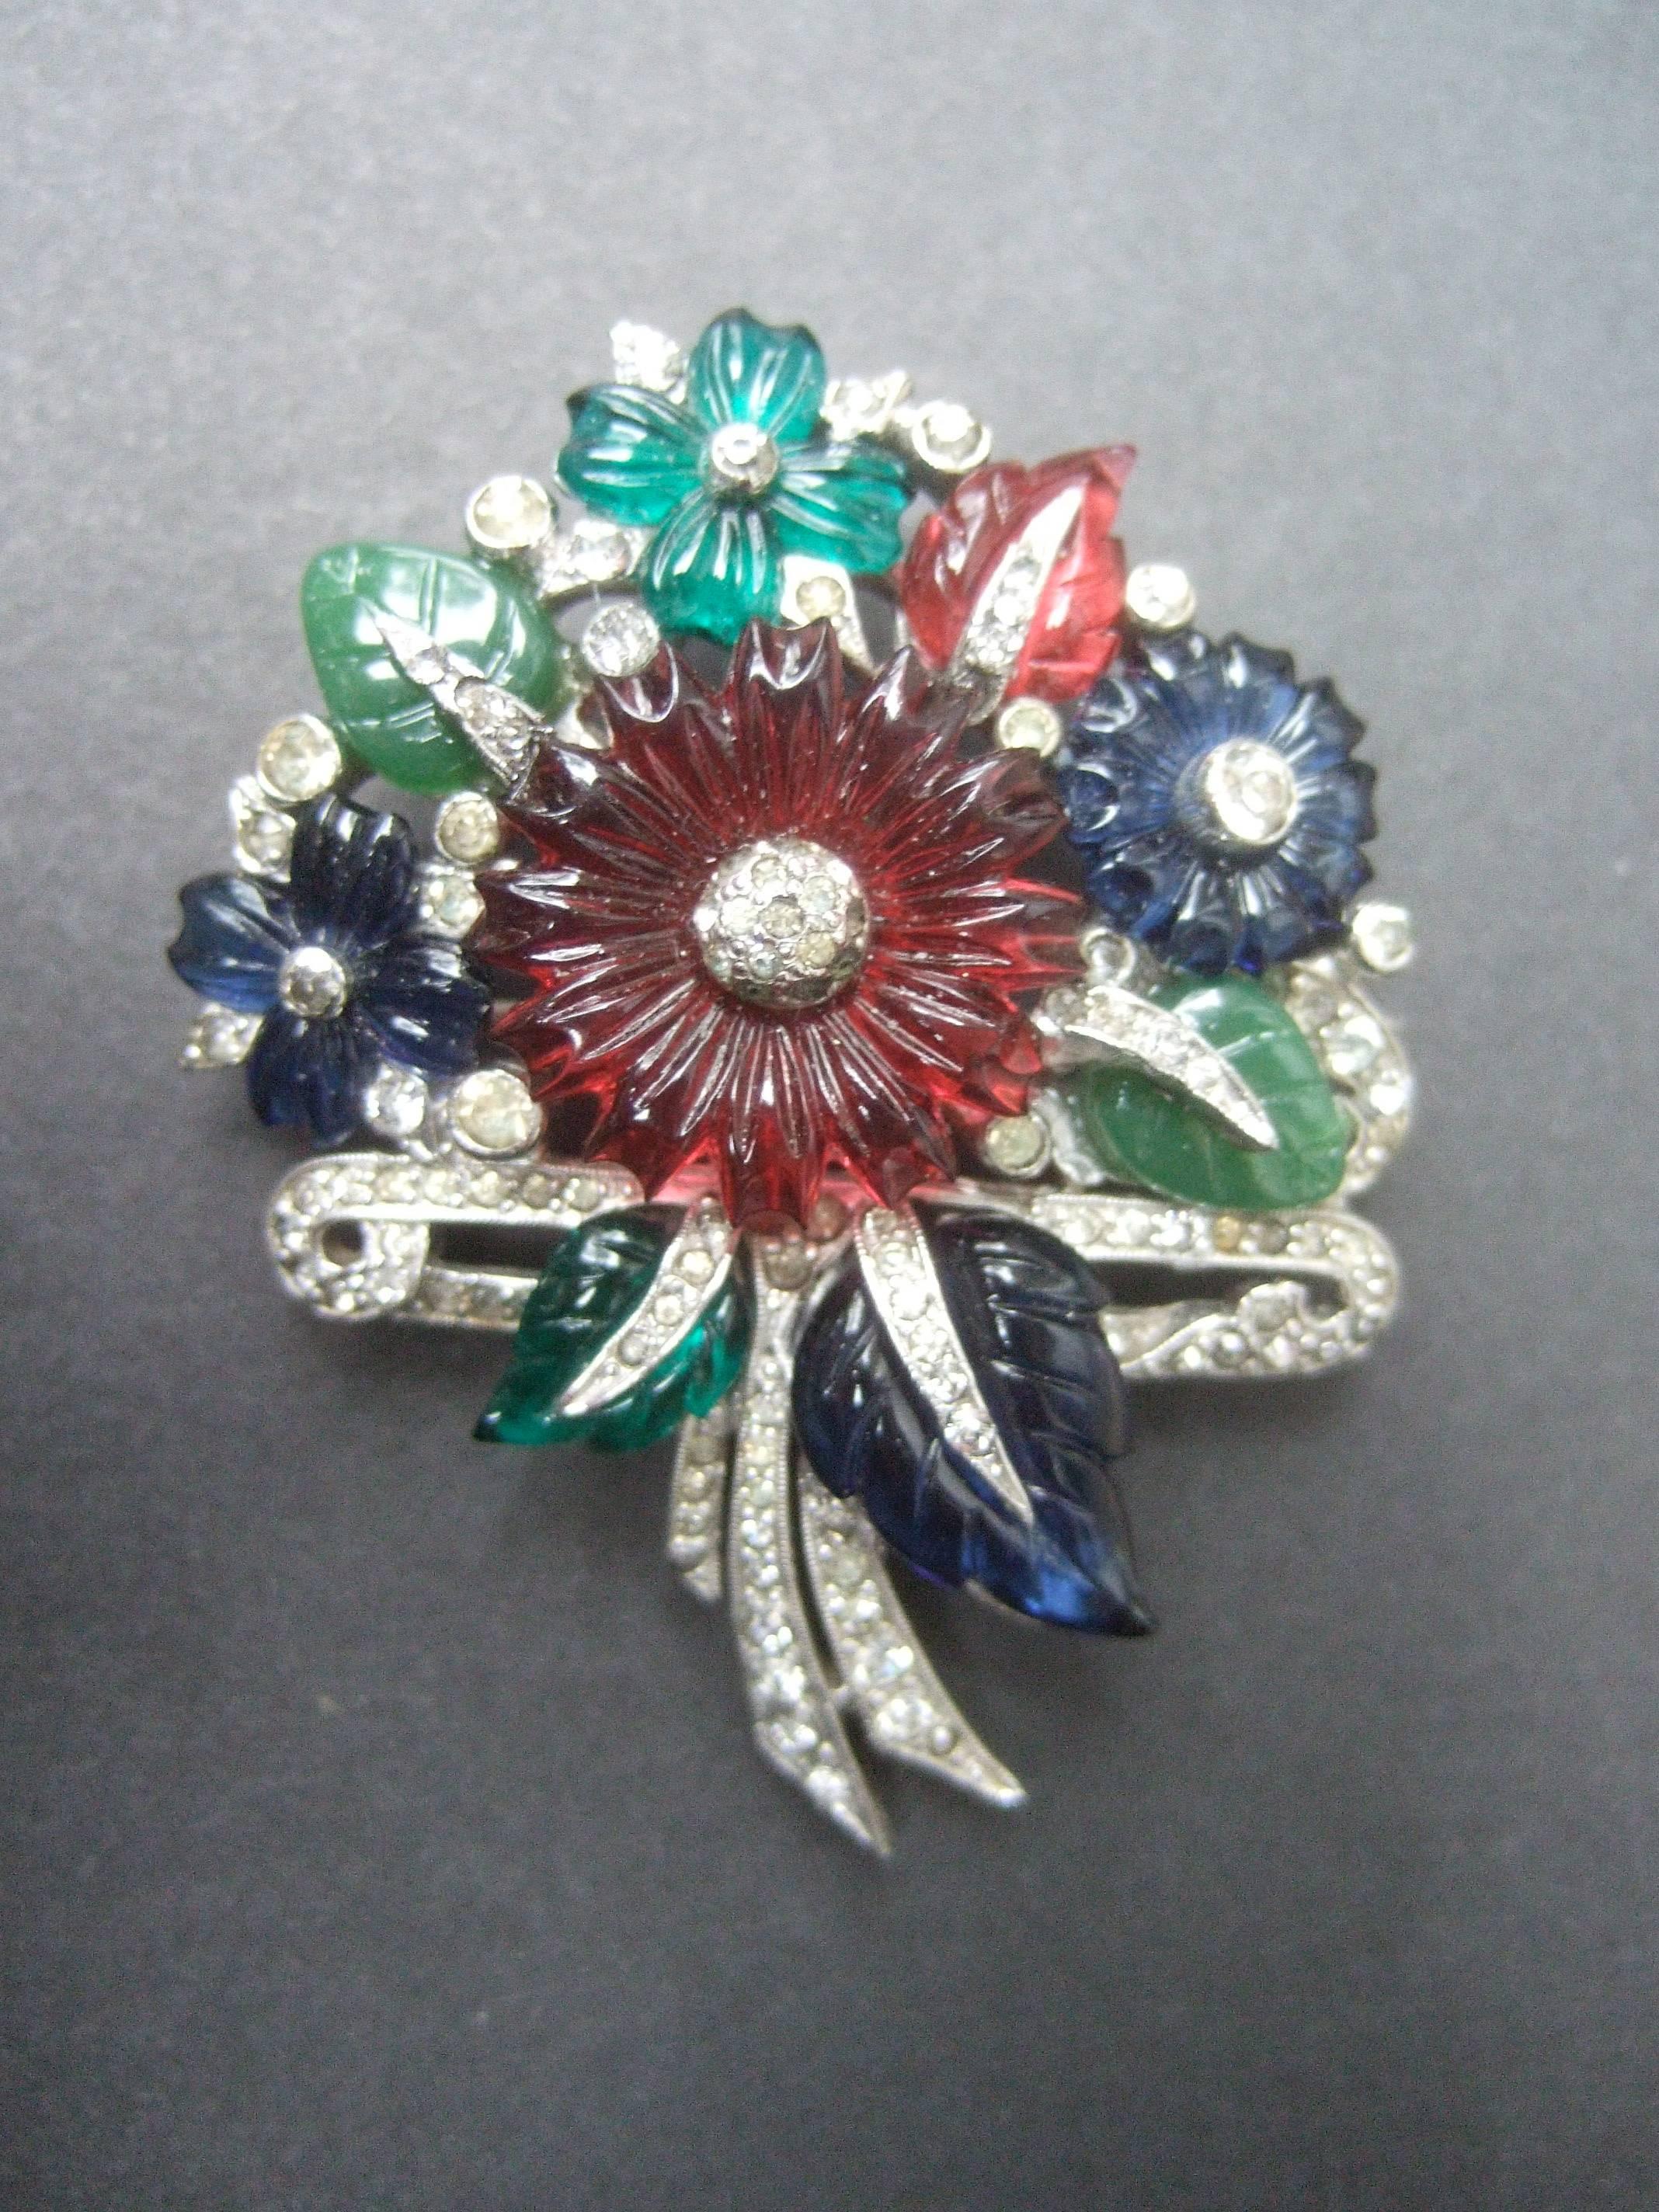 Art Deco Carved glass flower bouquet brooch c 1940
The elegant costume brooch is encrusted with 
clusters of jewel tone glass flowers and leaves

The ruby red, emerald green and sapphire blue
carved glass flowers and leaves emulate precious 